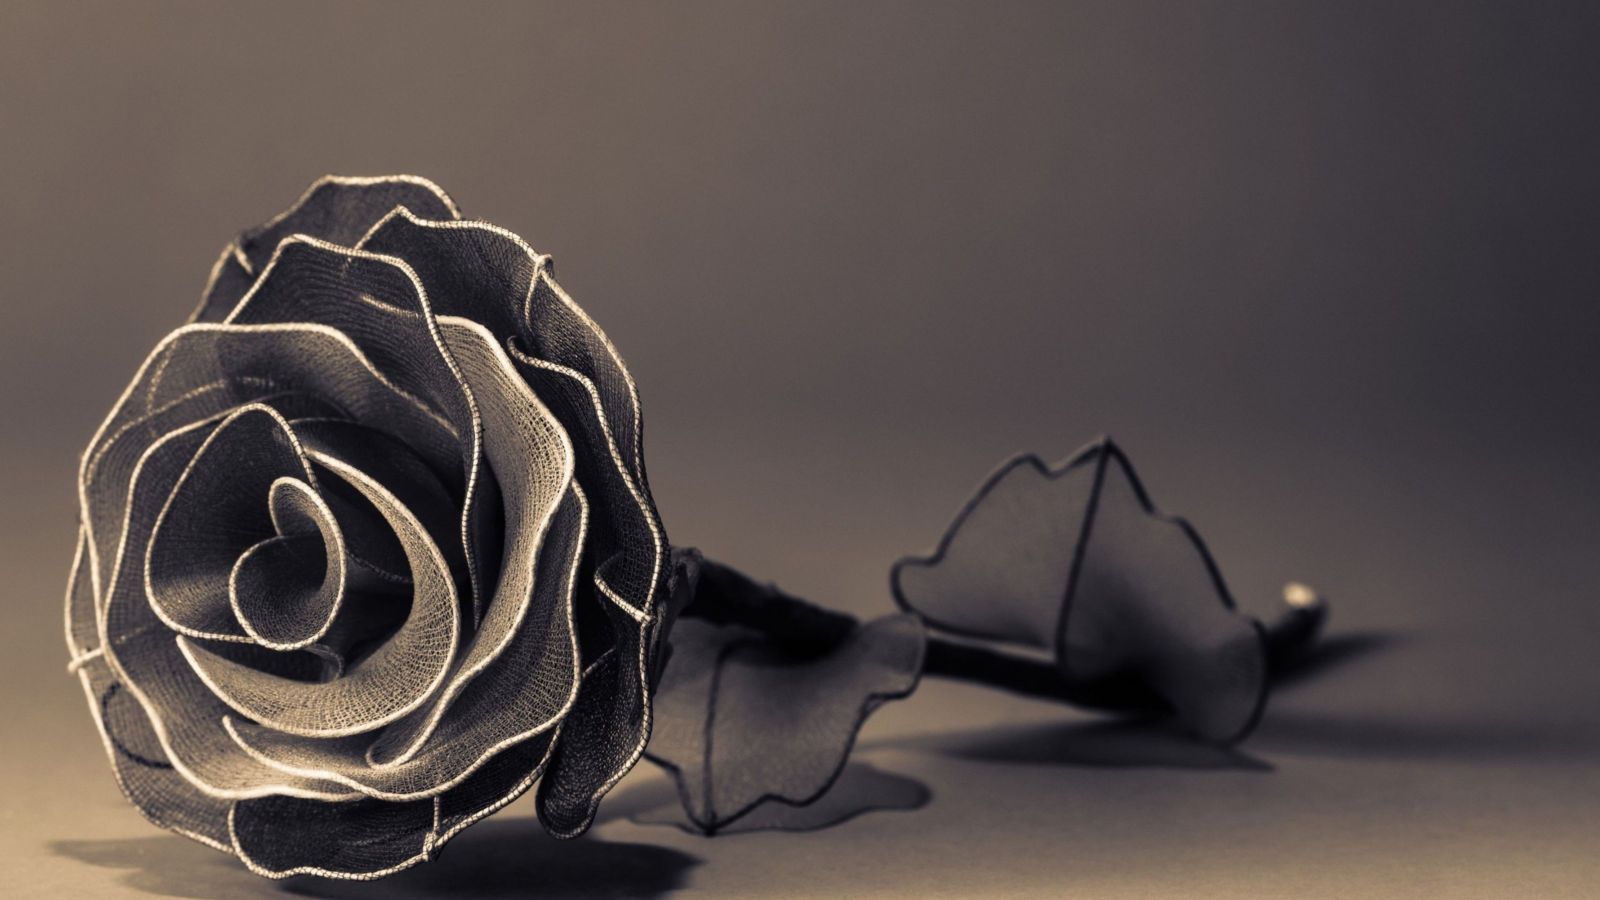 Free download Black Rose 4K Wallpaper Picture Image [1600x900] for your